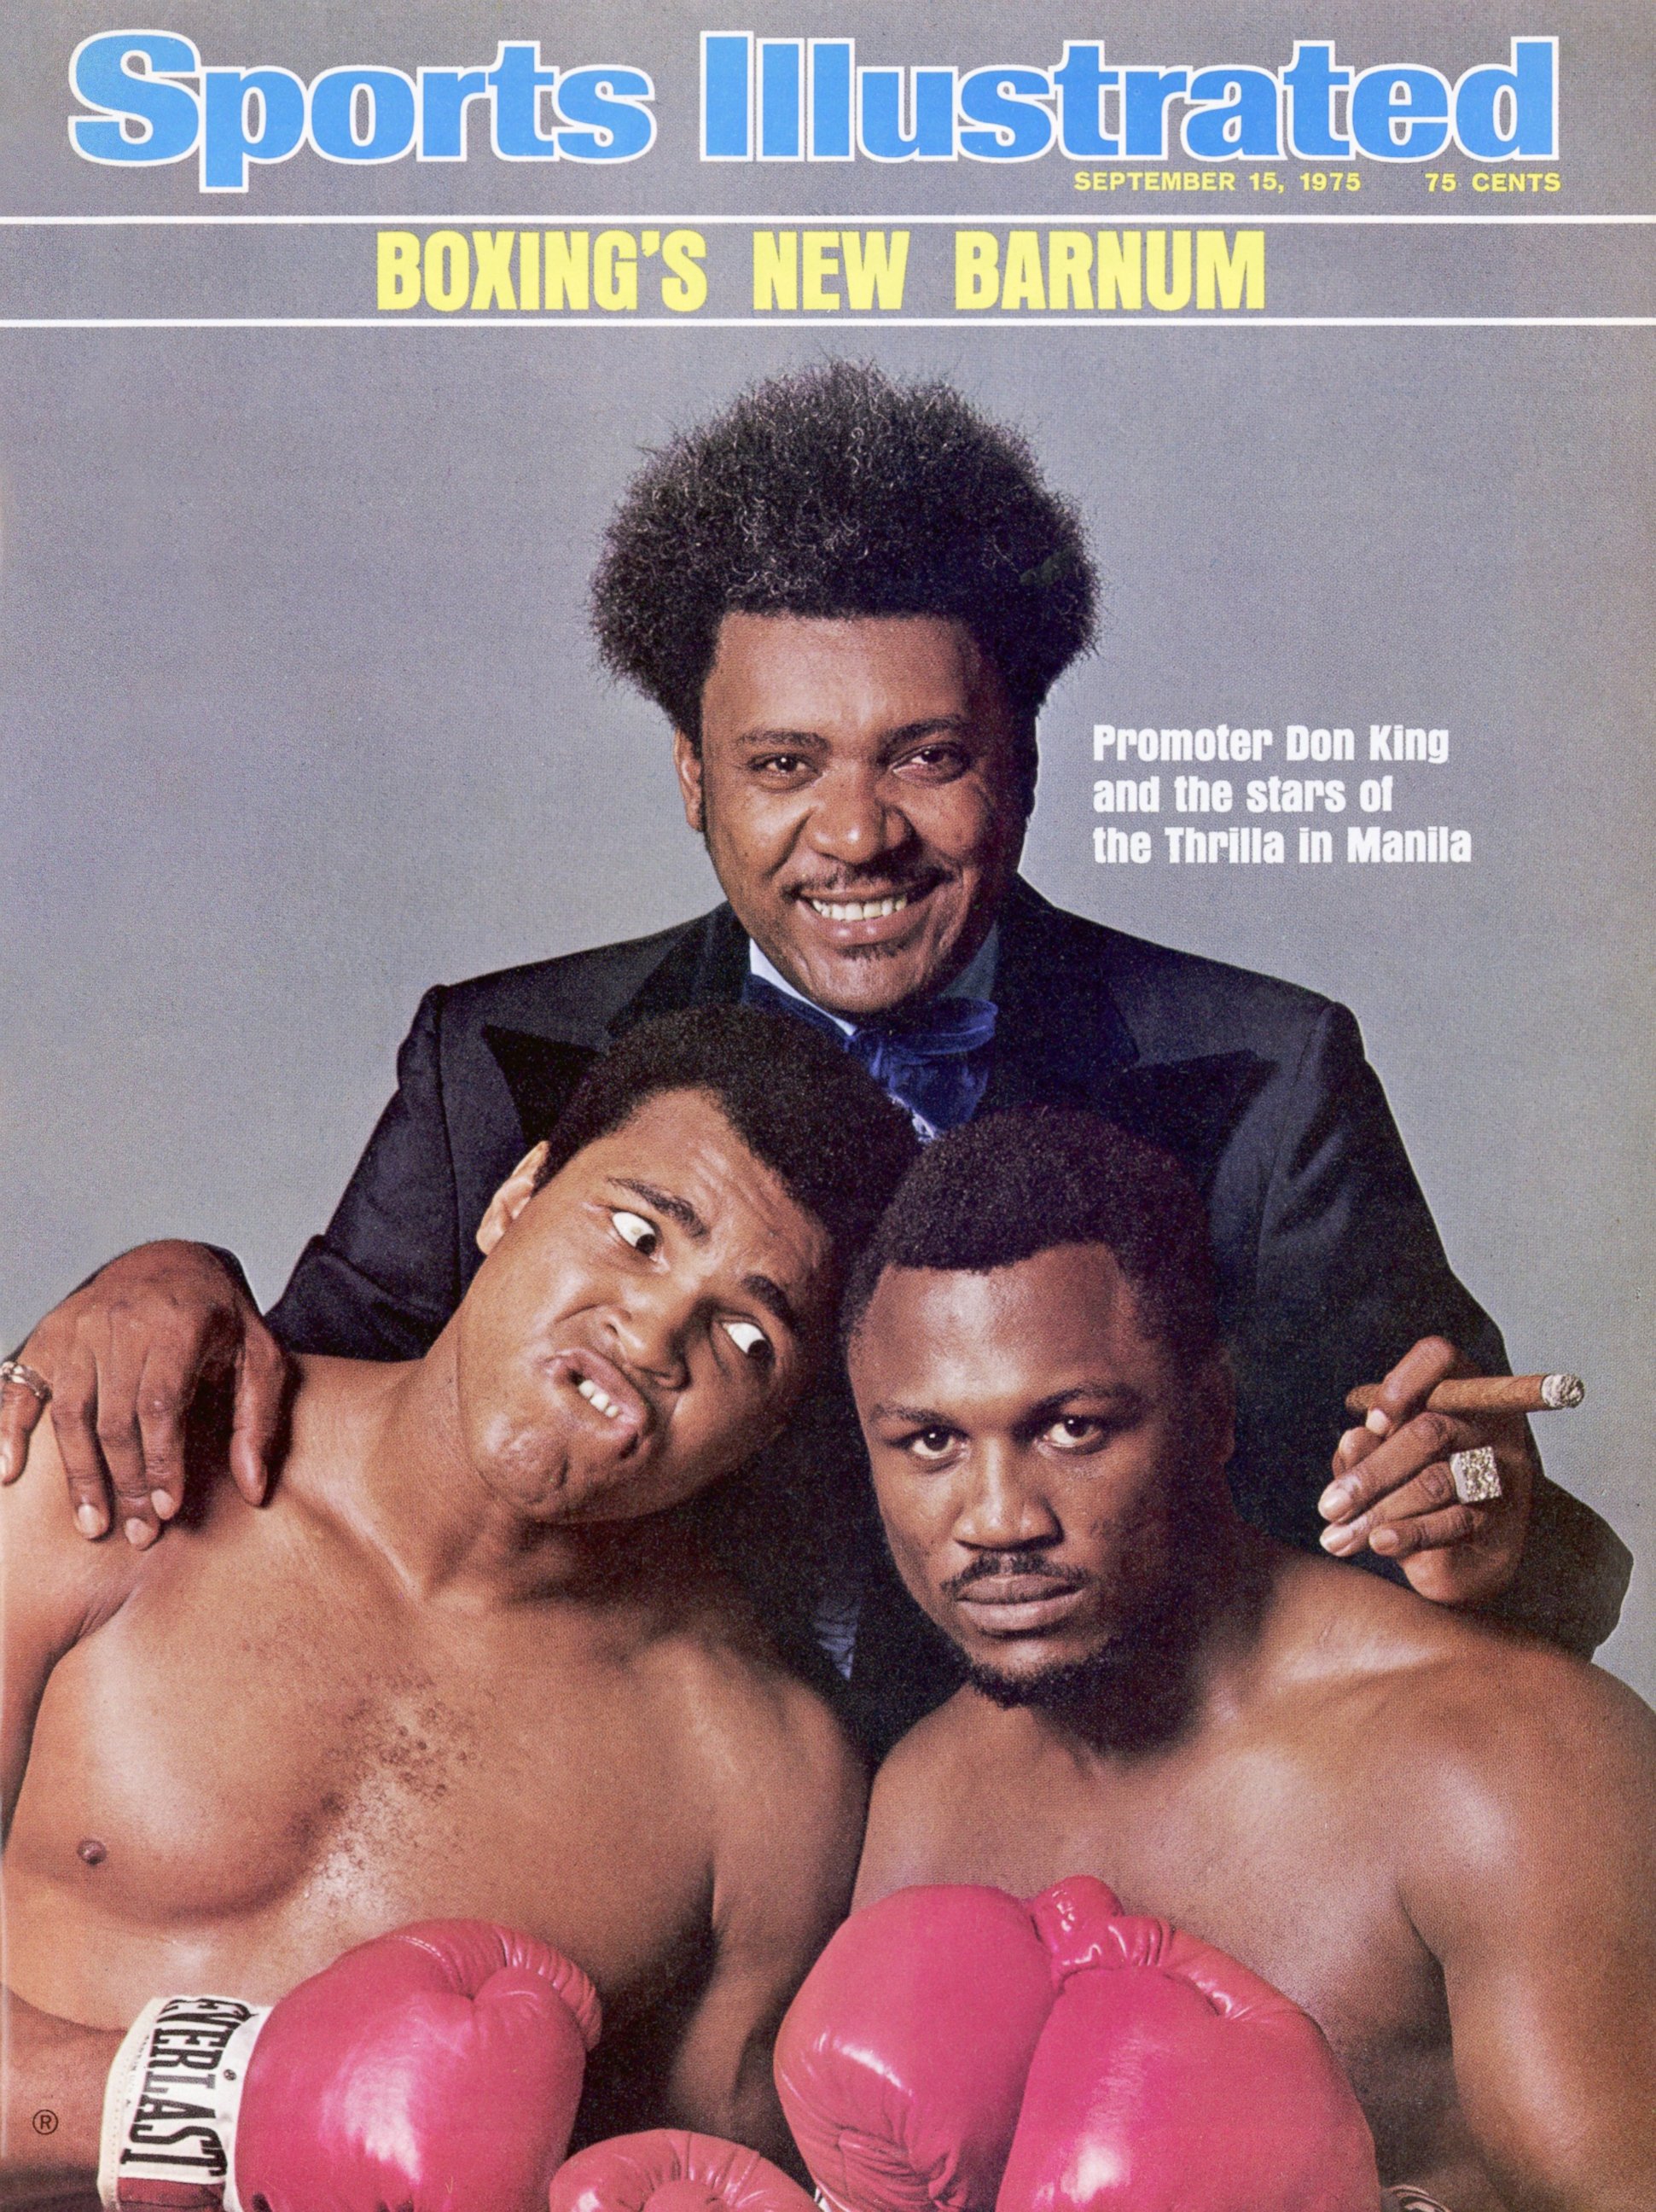 PHOTO: Promoter Don King with heavyweights Muhammad Ali and Joe Frazier on the September 15, 1975 cover of Sports Illustrated.